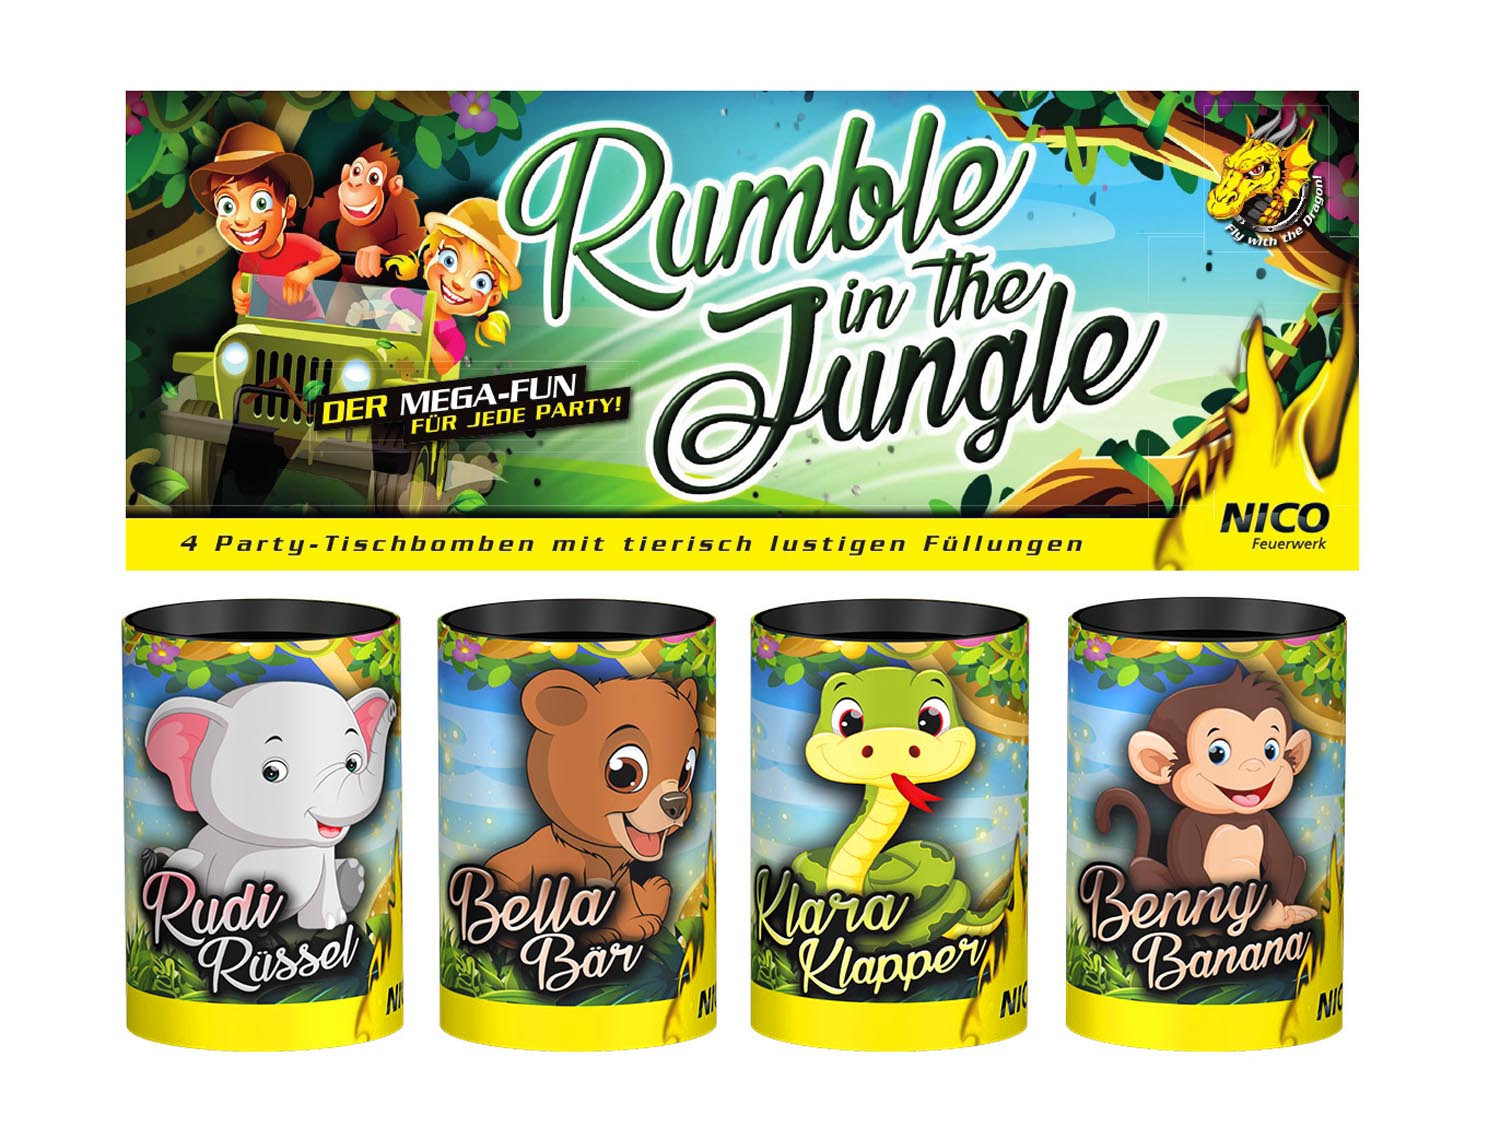 Rumble in the Jungle, 4er-Beutel